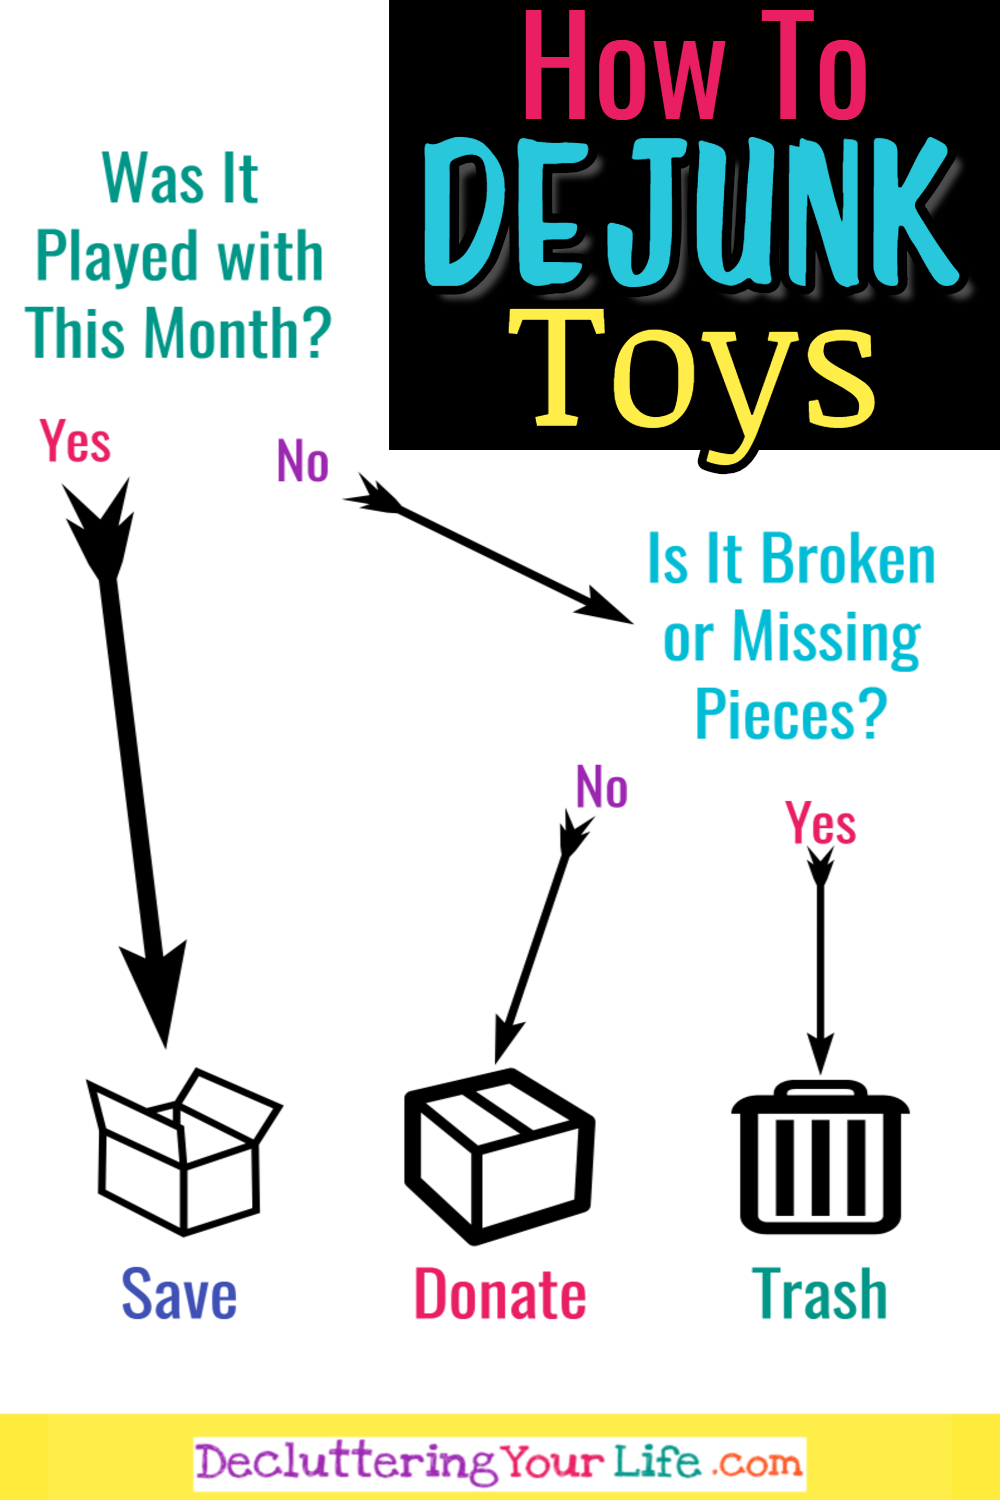 How to DEJUNK Toys - the EASY Way. Our readers ask "HOW do you organize and declutter toys?" and "HOW do you MANAGE toys?"  Here's how I organize my toy room with these simple rules for decluttering toys.  See my simple steps to declutter kids room and DEJUNK toys.  Great help if you want to know how to organize too many toys too and reduce toy clutter.